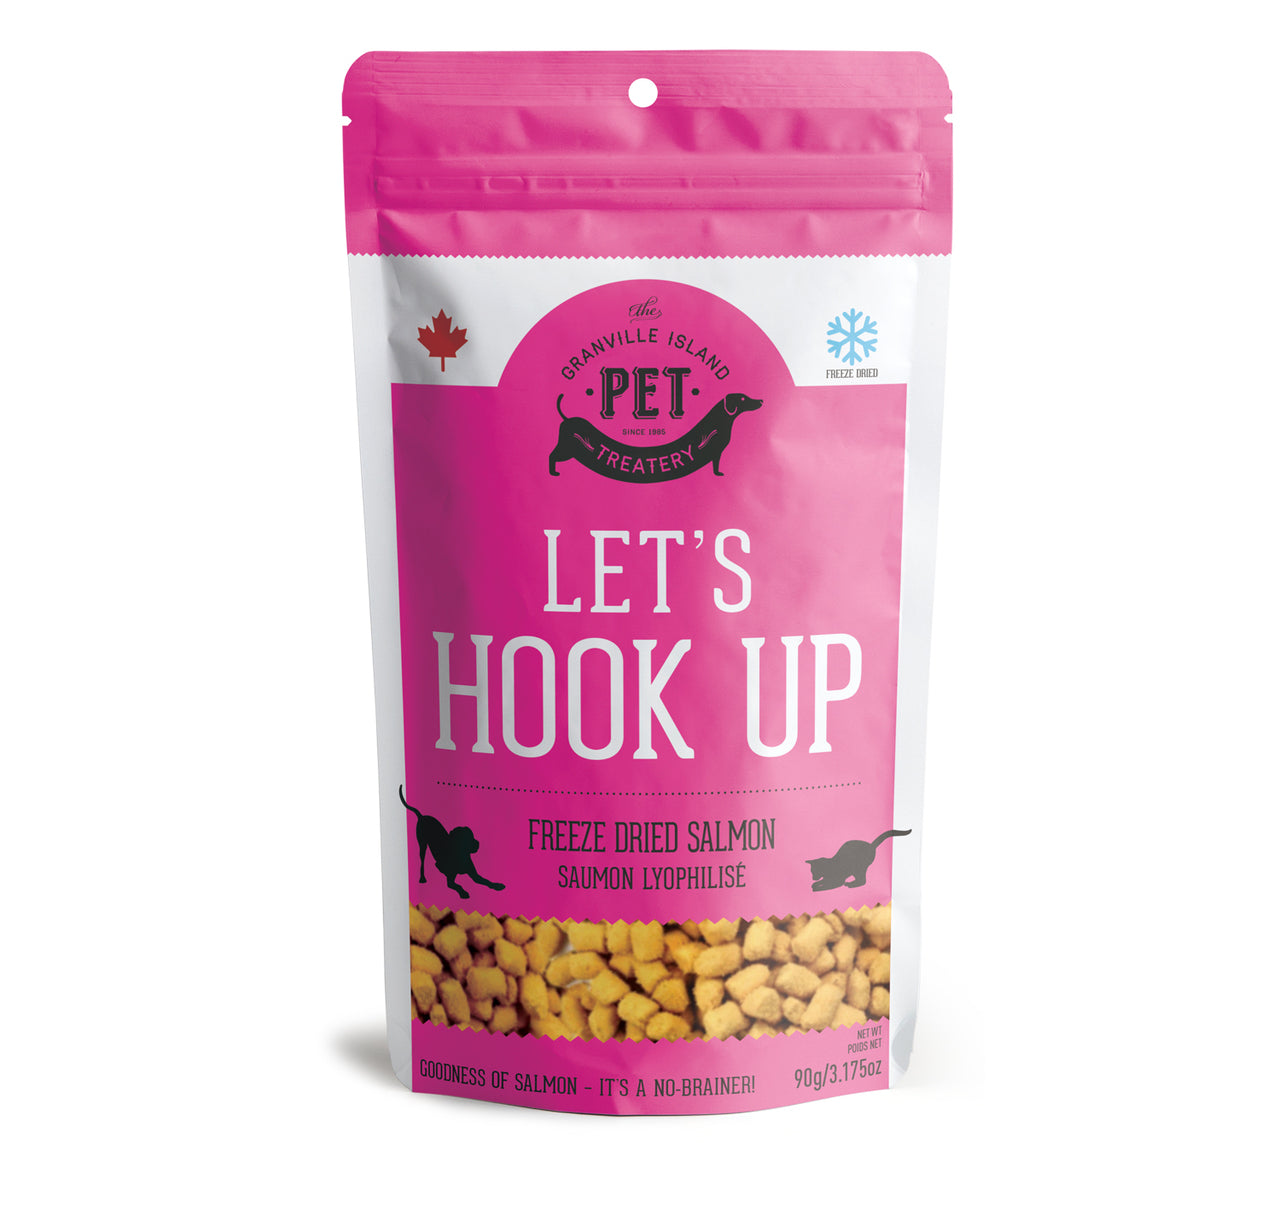 Granville Island Pet Treatery Let's Hook Up Salmon Freeze-Dried Dog and Cat Treats - 3.17 oz Bag  